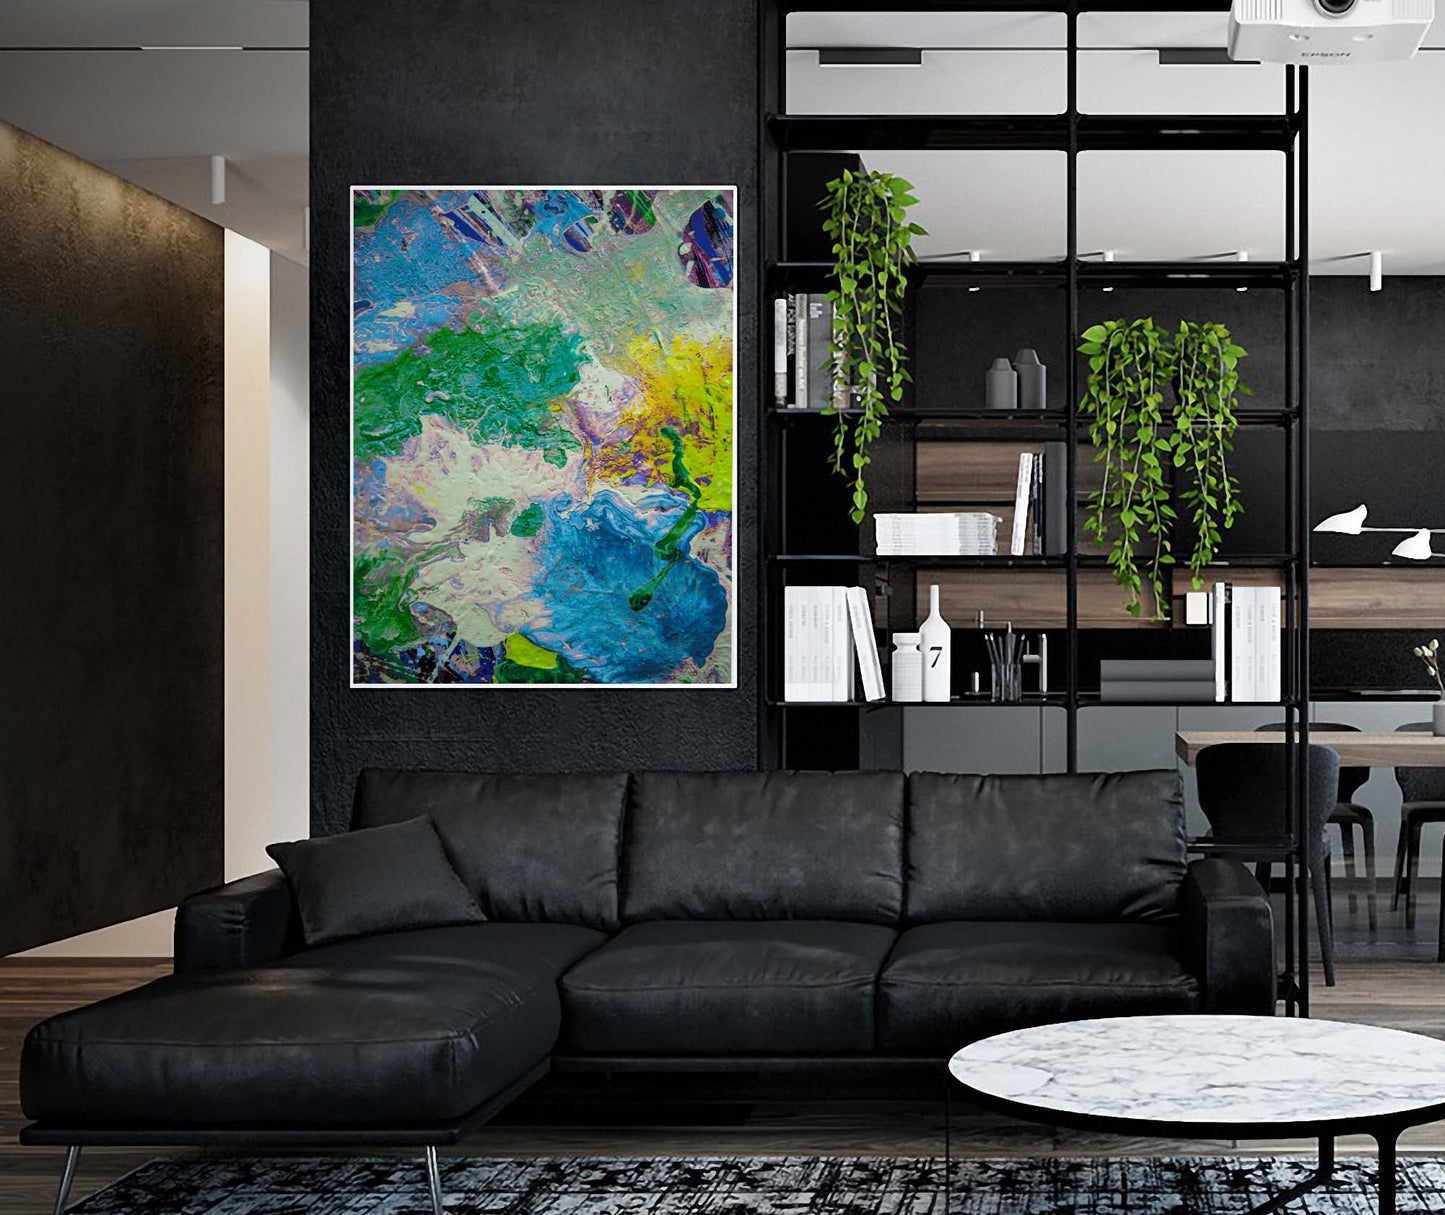 Abstract Pour 21 Galopagos artwork by Doug LaRue framed and hung on a living room wall over a black couch